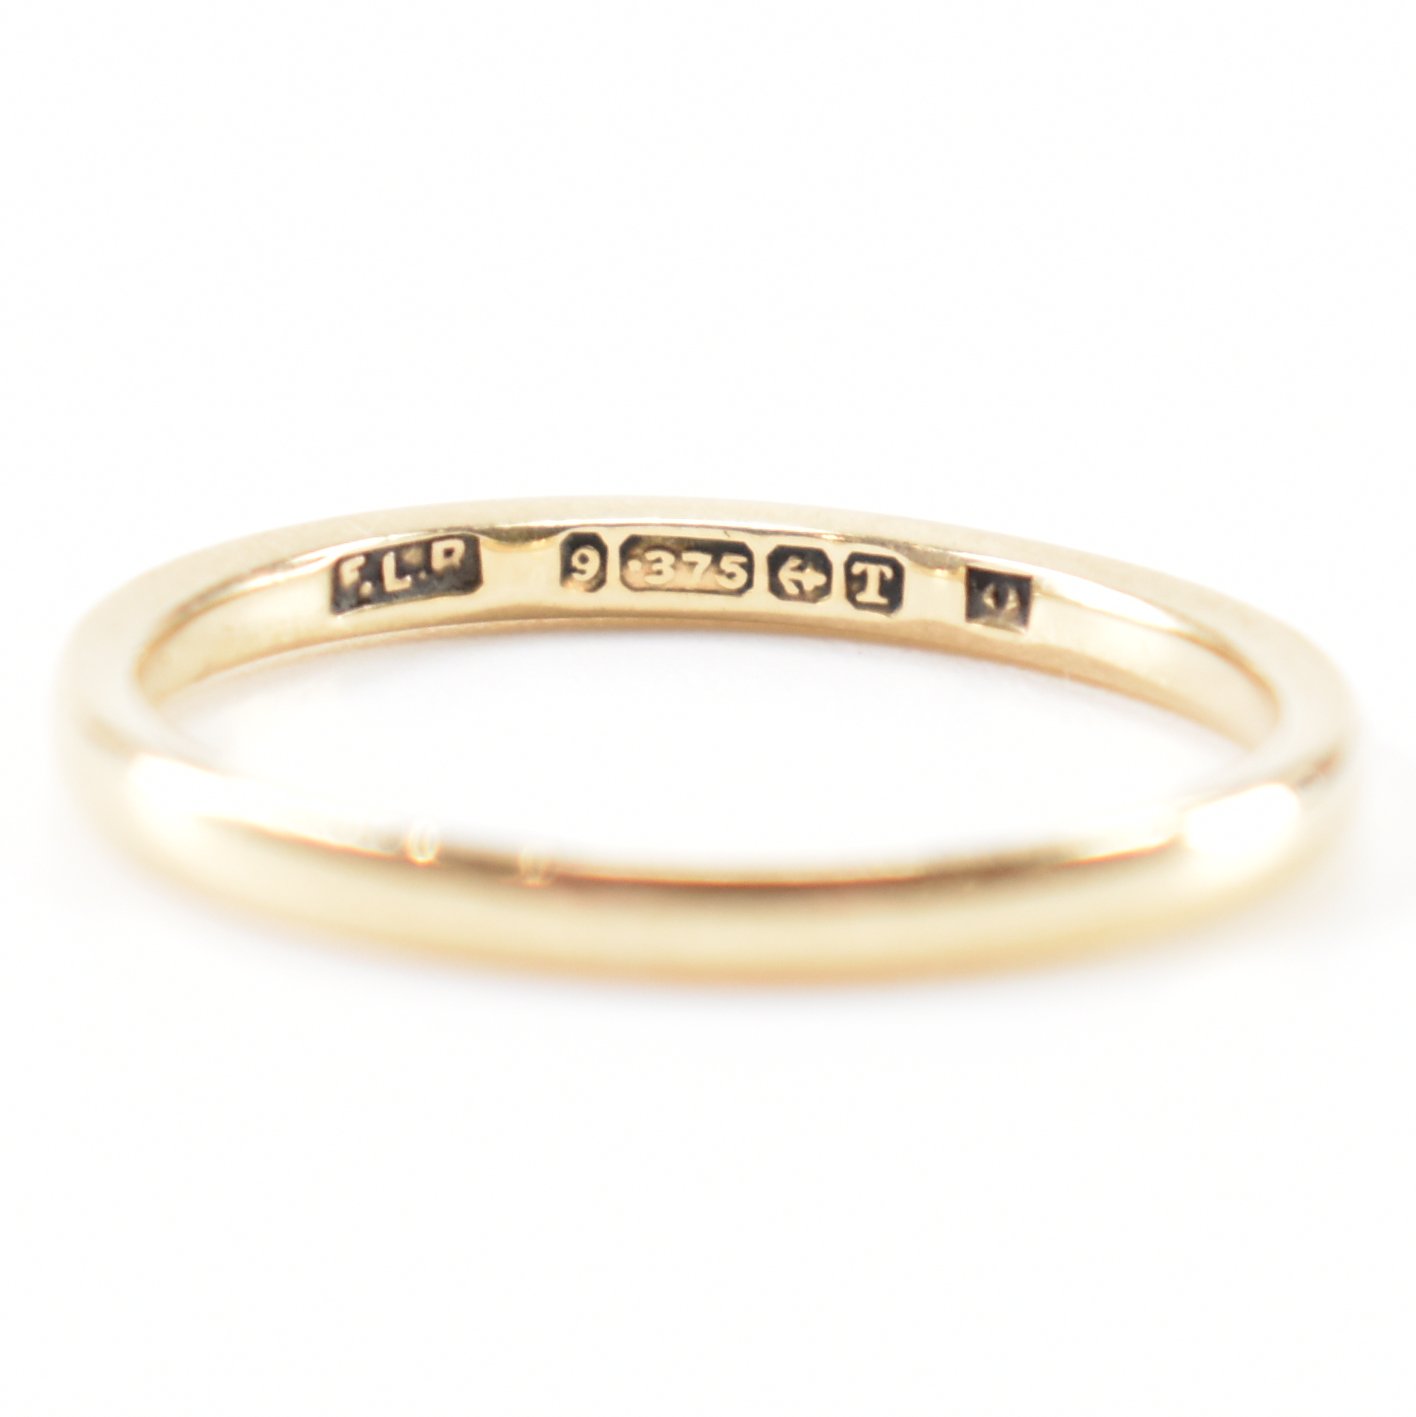 HALLMARKED 9CT GOLD BAND RING - Image 5 of 6